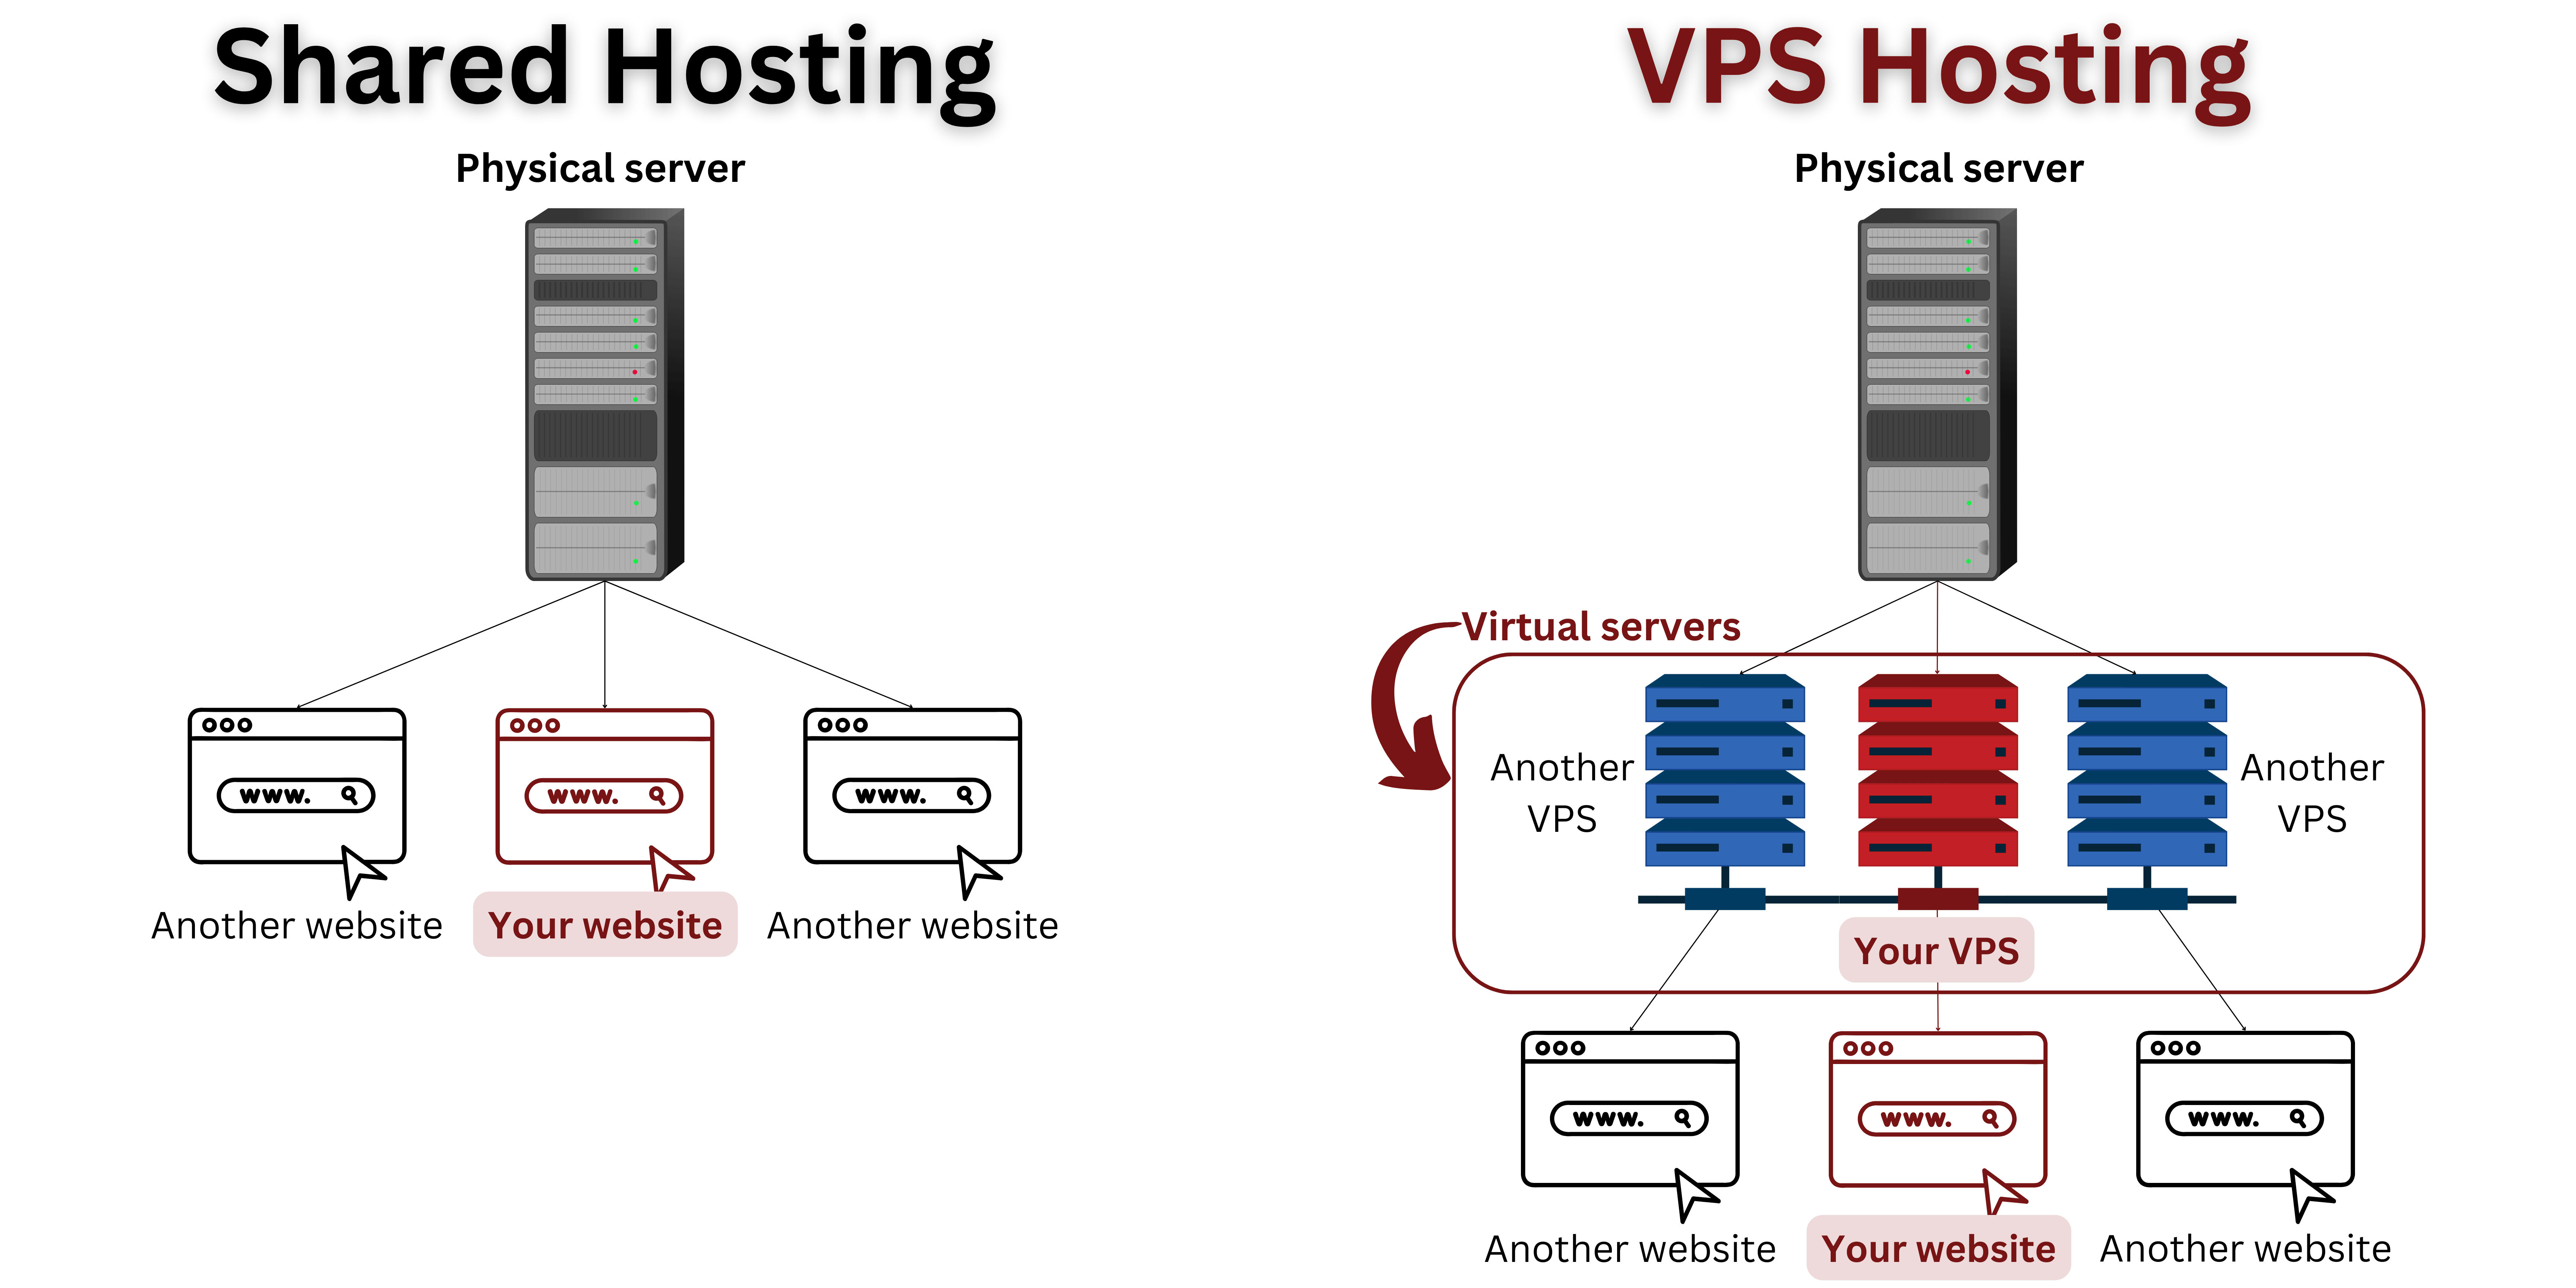 An illustration showing the difference between shared hosting and VPS hosting.